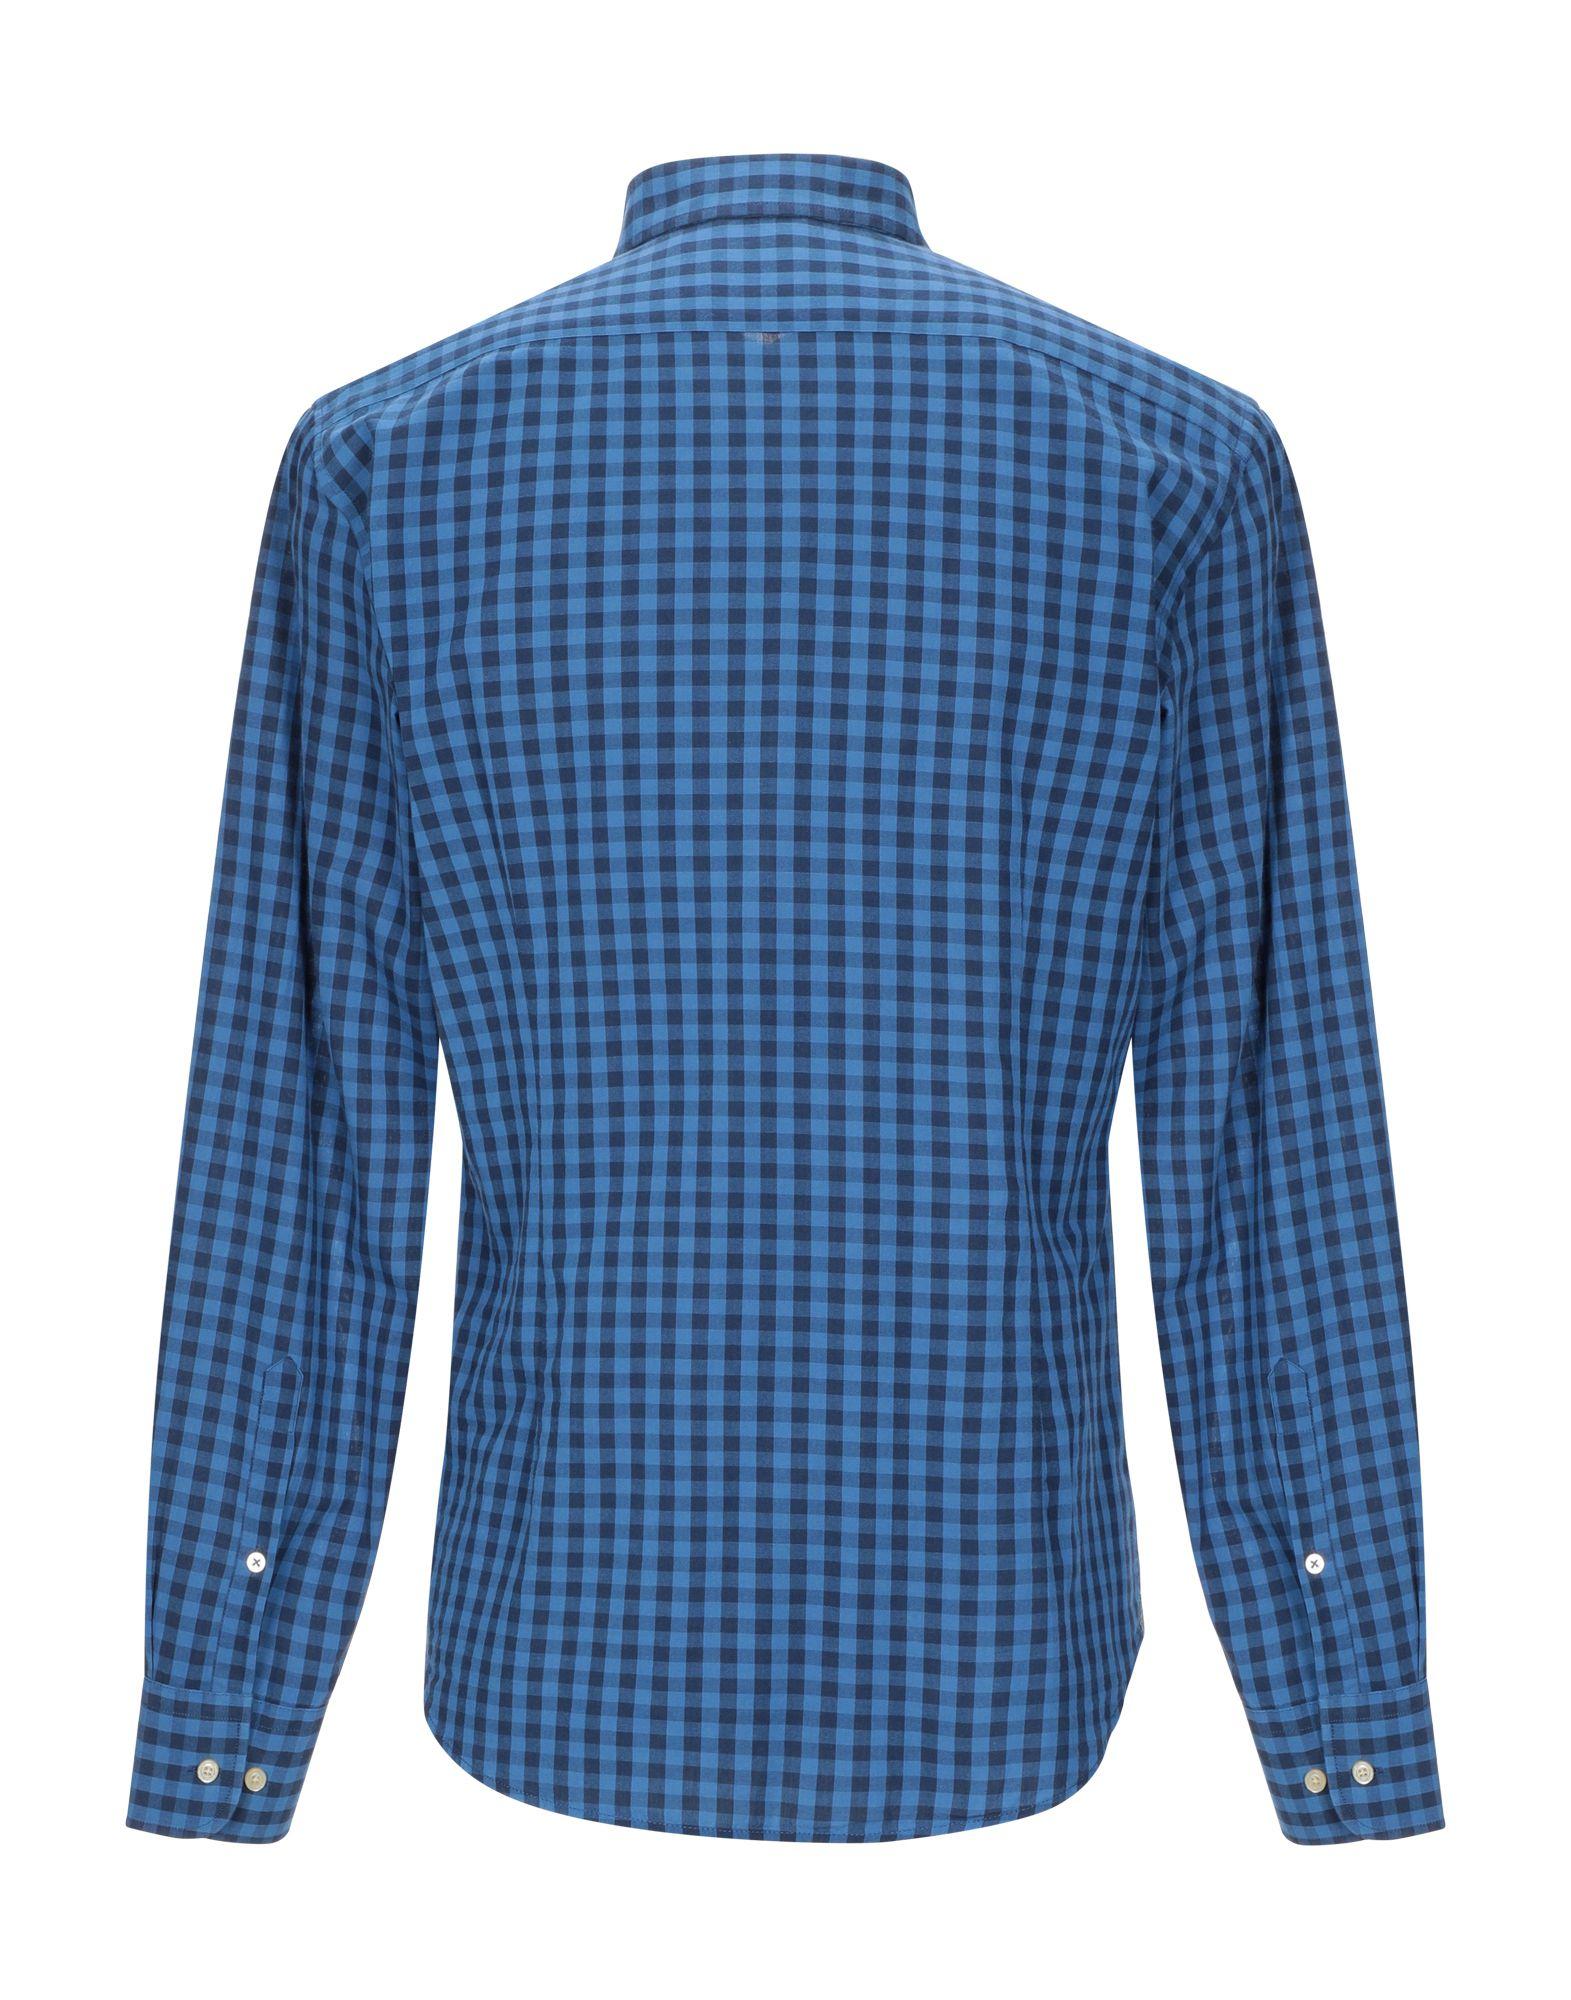 Henry Cotton's Cotton Shirt in Blue for Men - Lyst